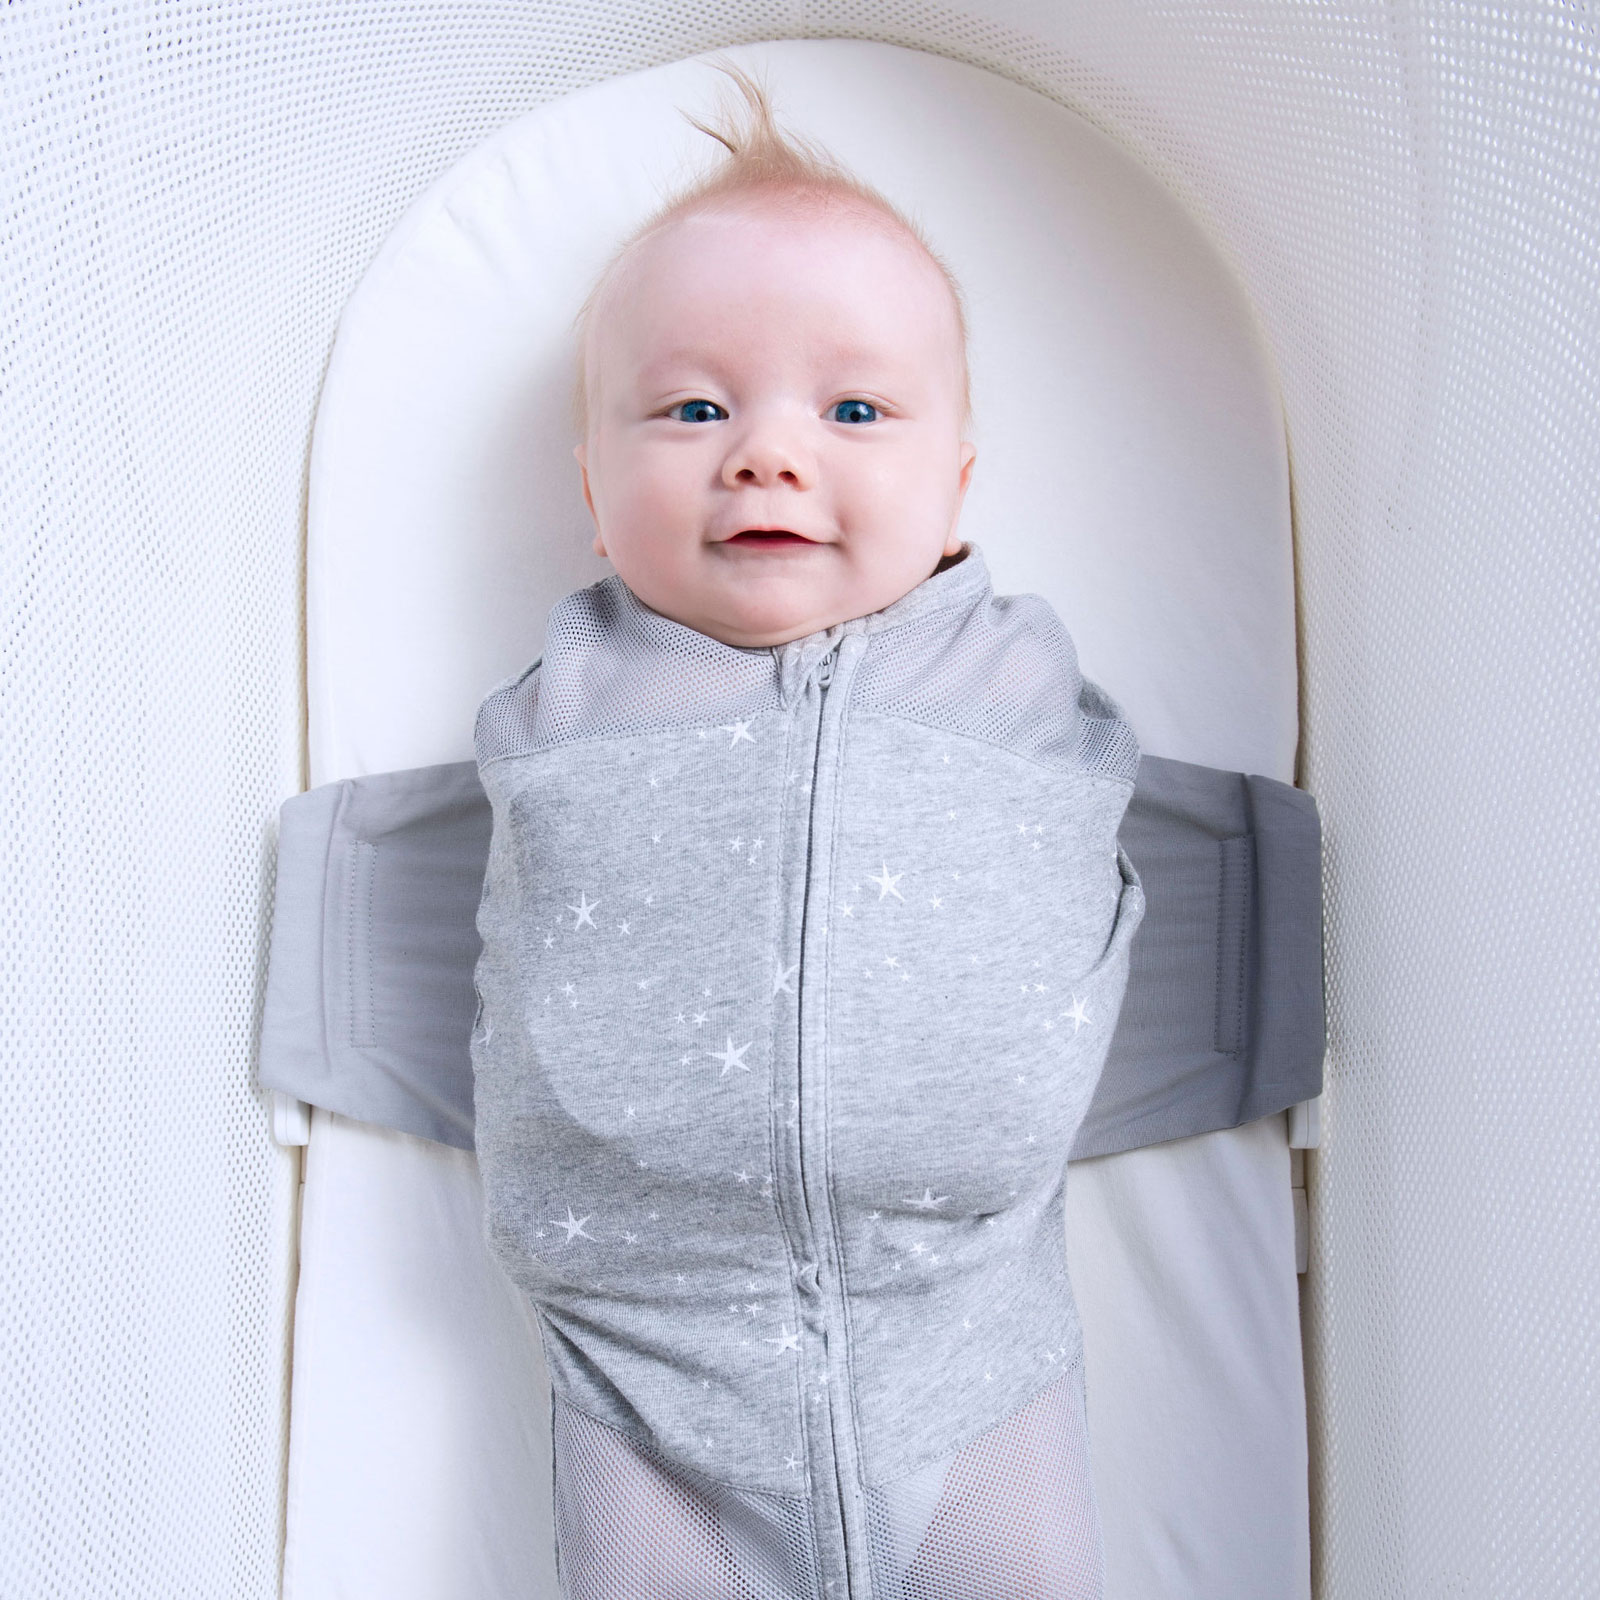 The Happiest Baby SNOO Smart Sleeper Baby Cot Is Put To The Test